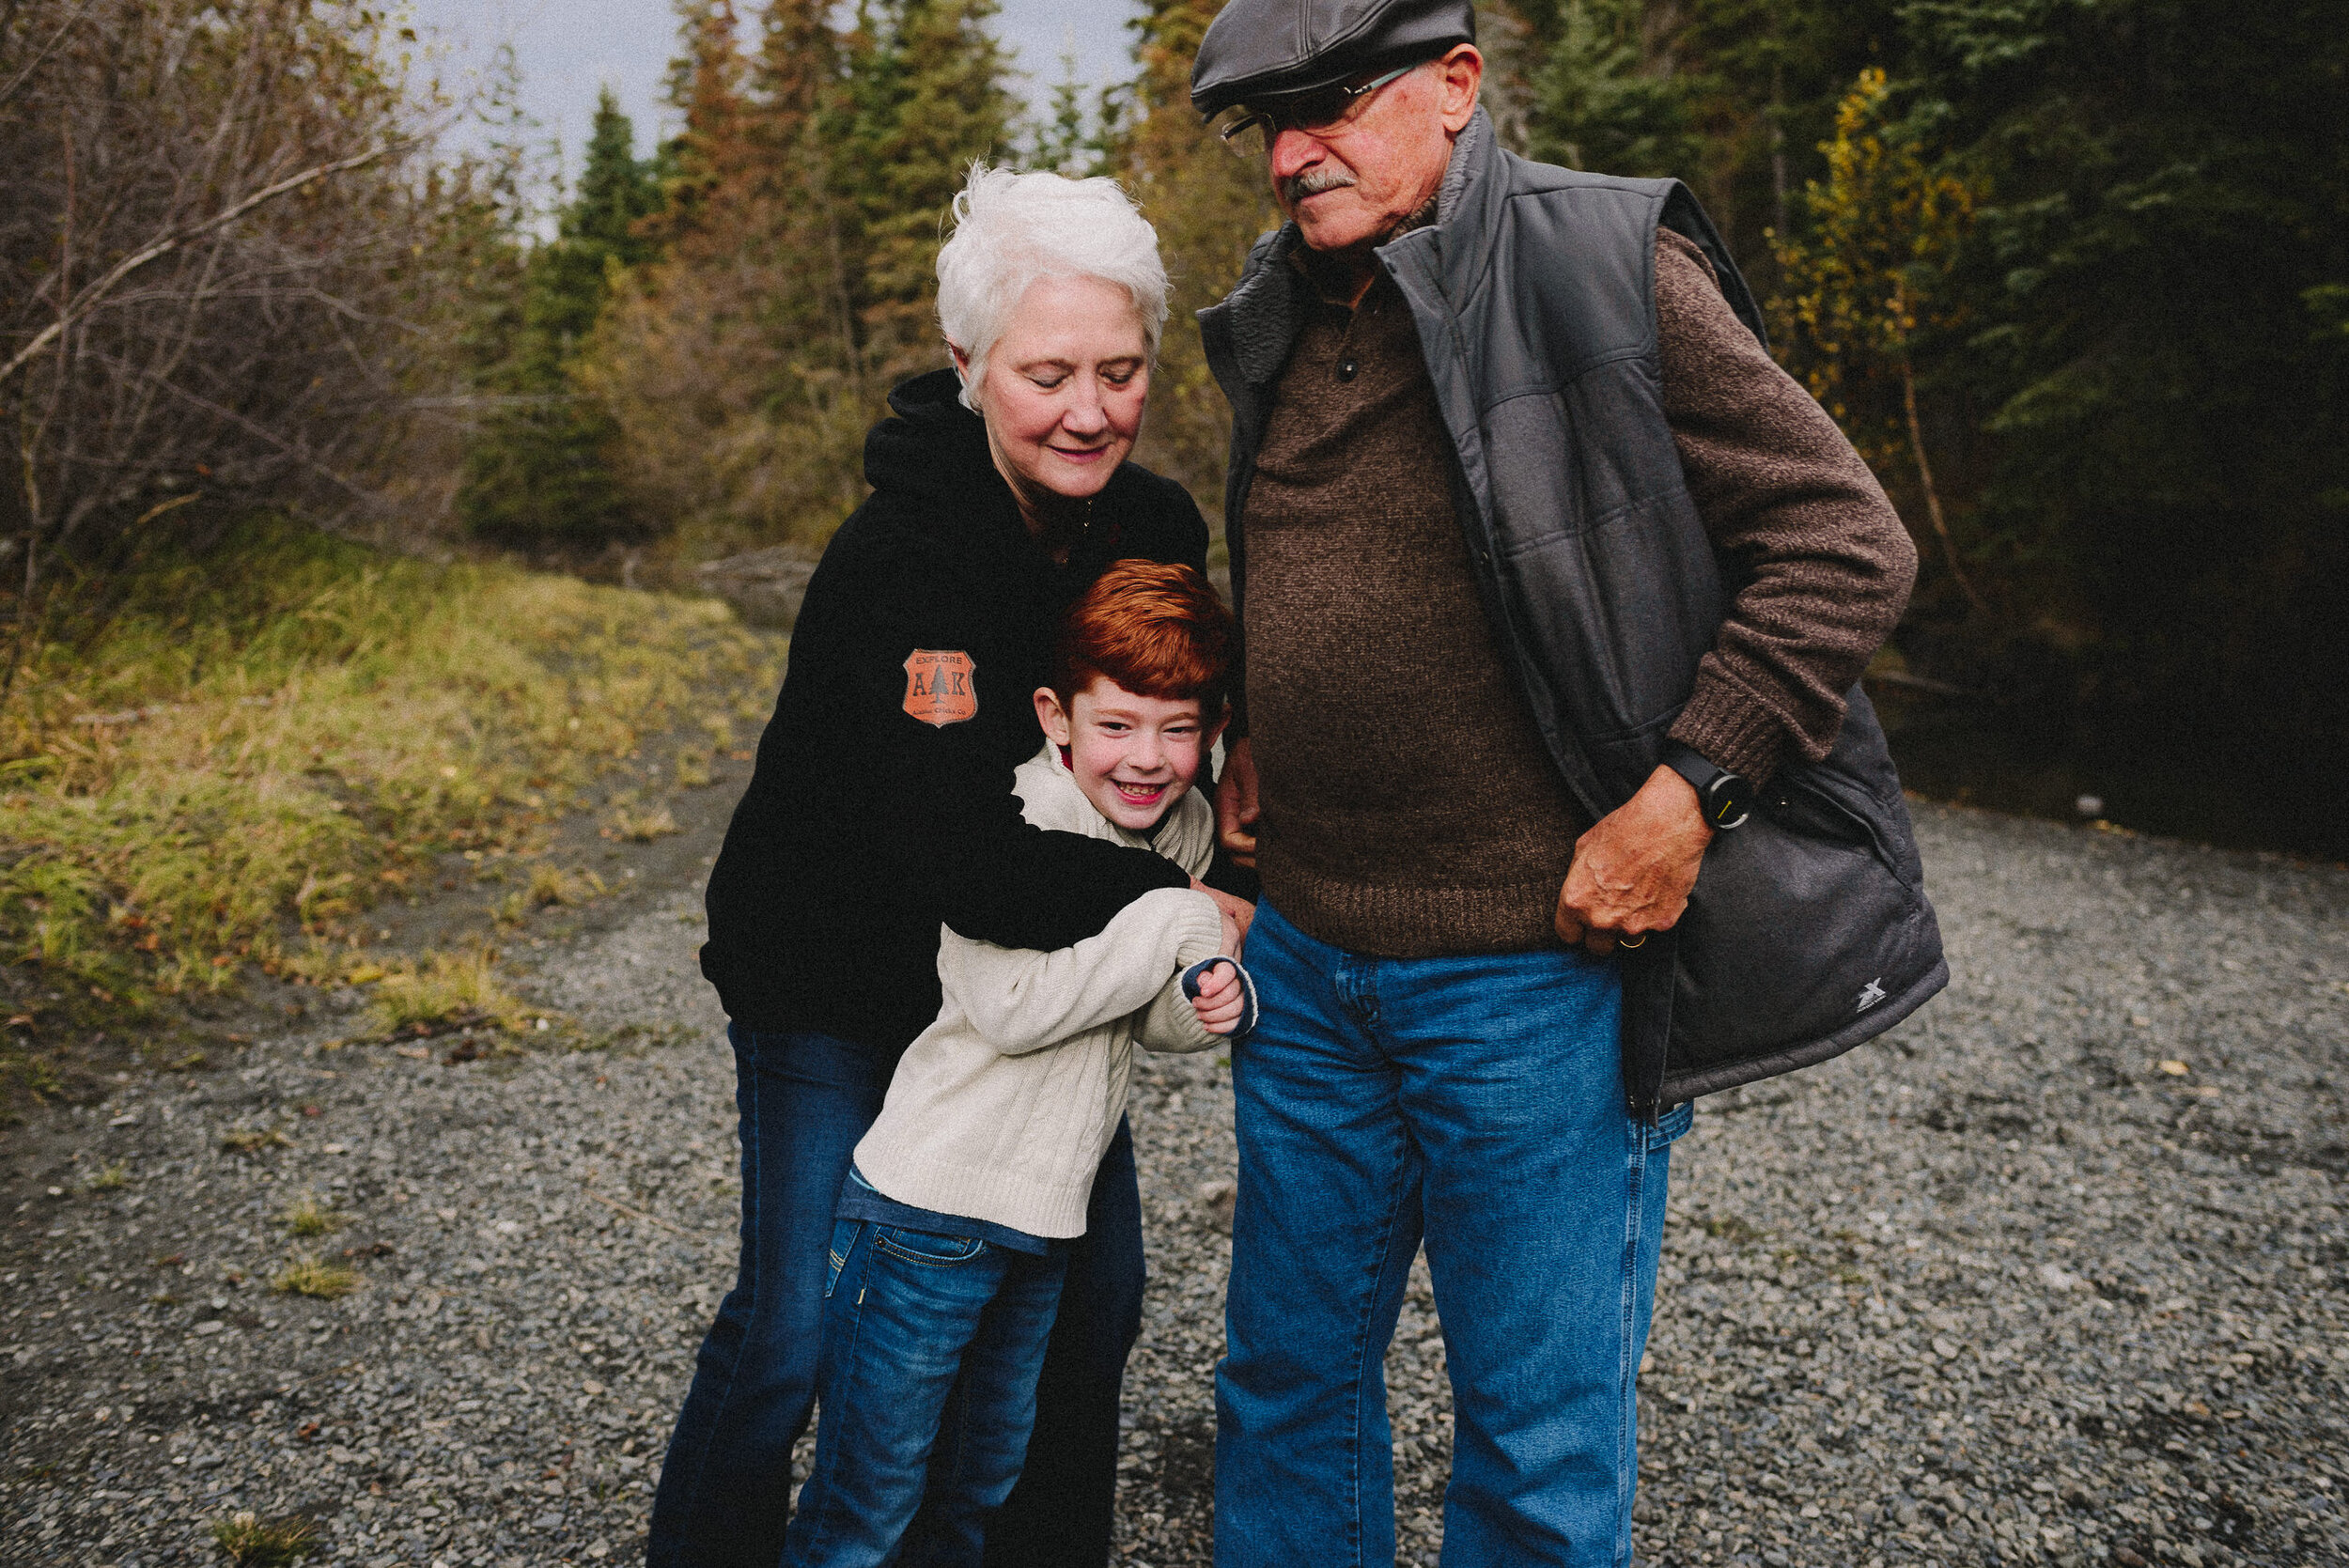 north-fork-eagle-river-fall-family-session-alaska-photographer-way-up-north-photography (42).jpg